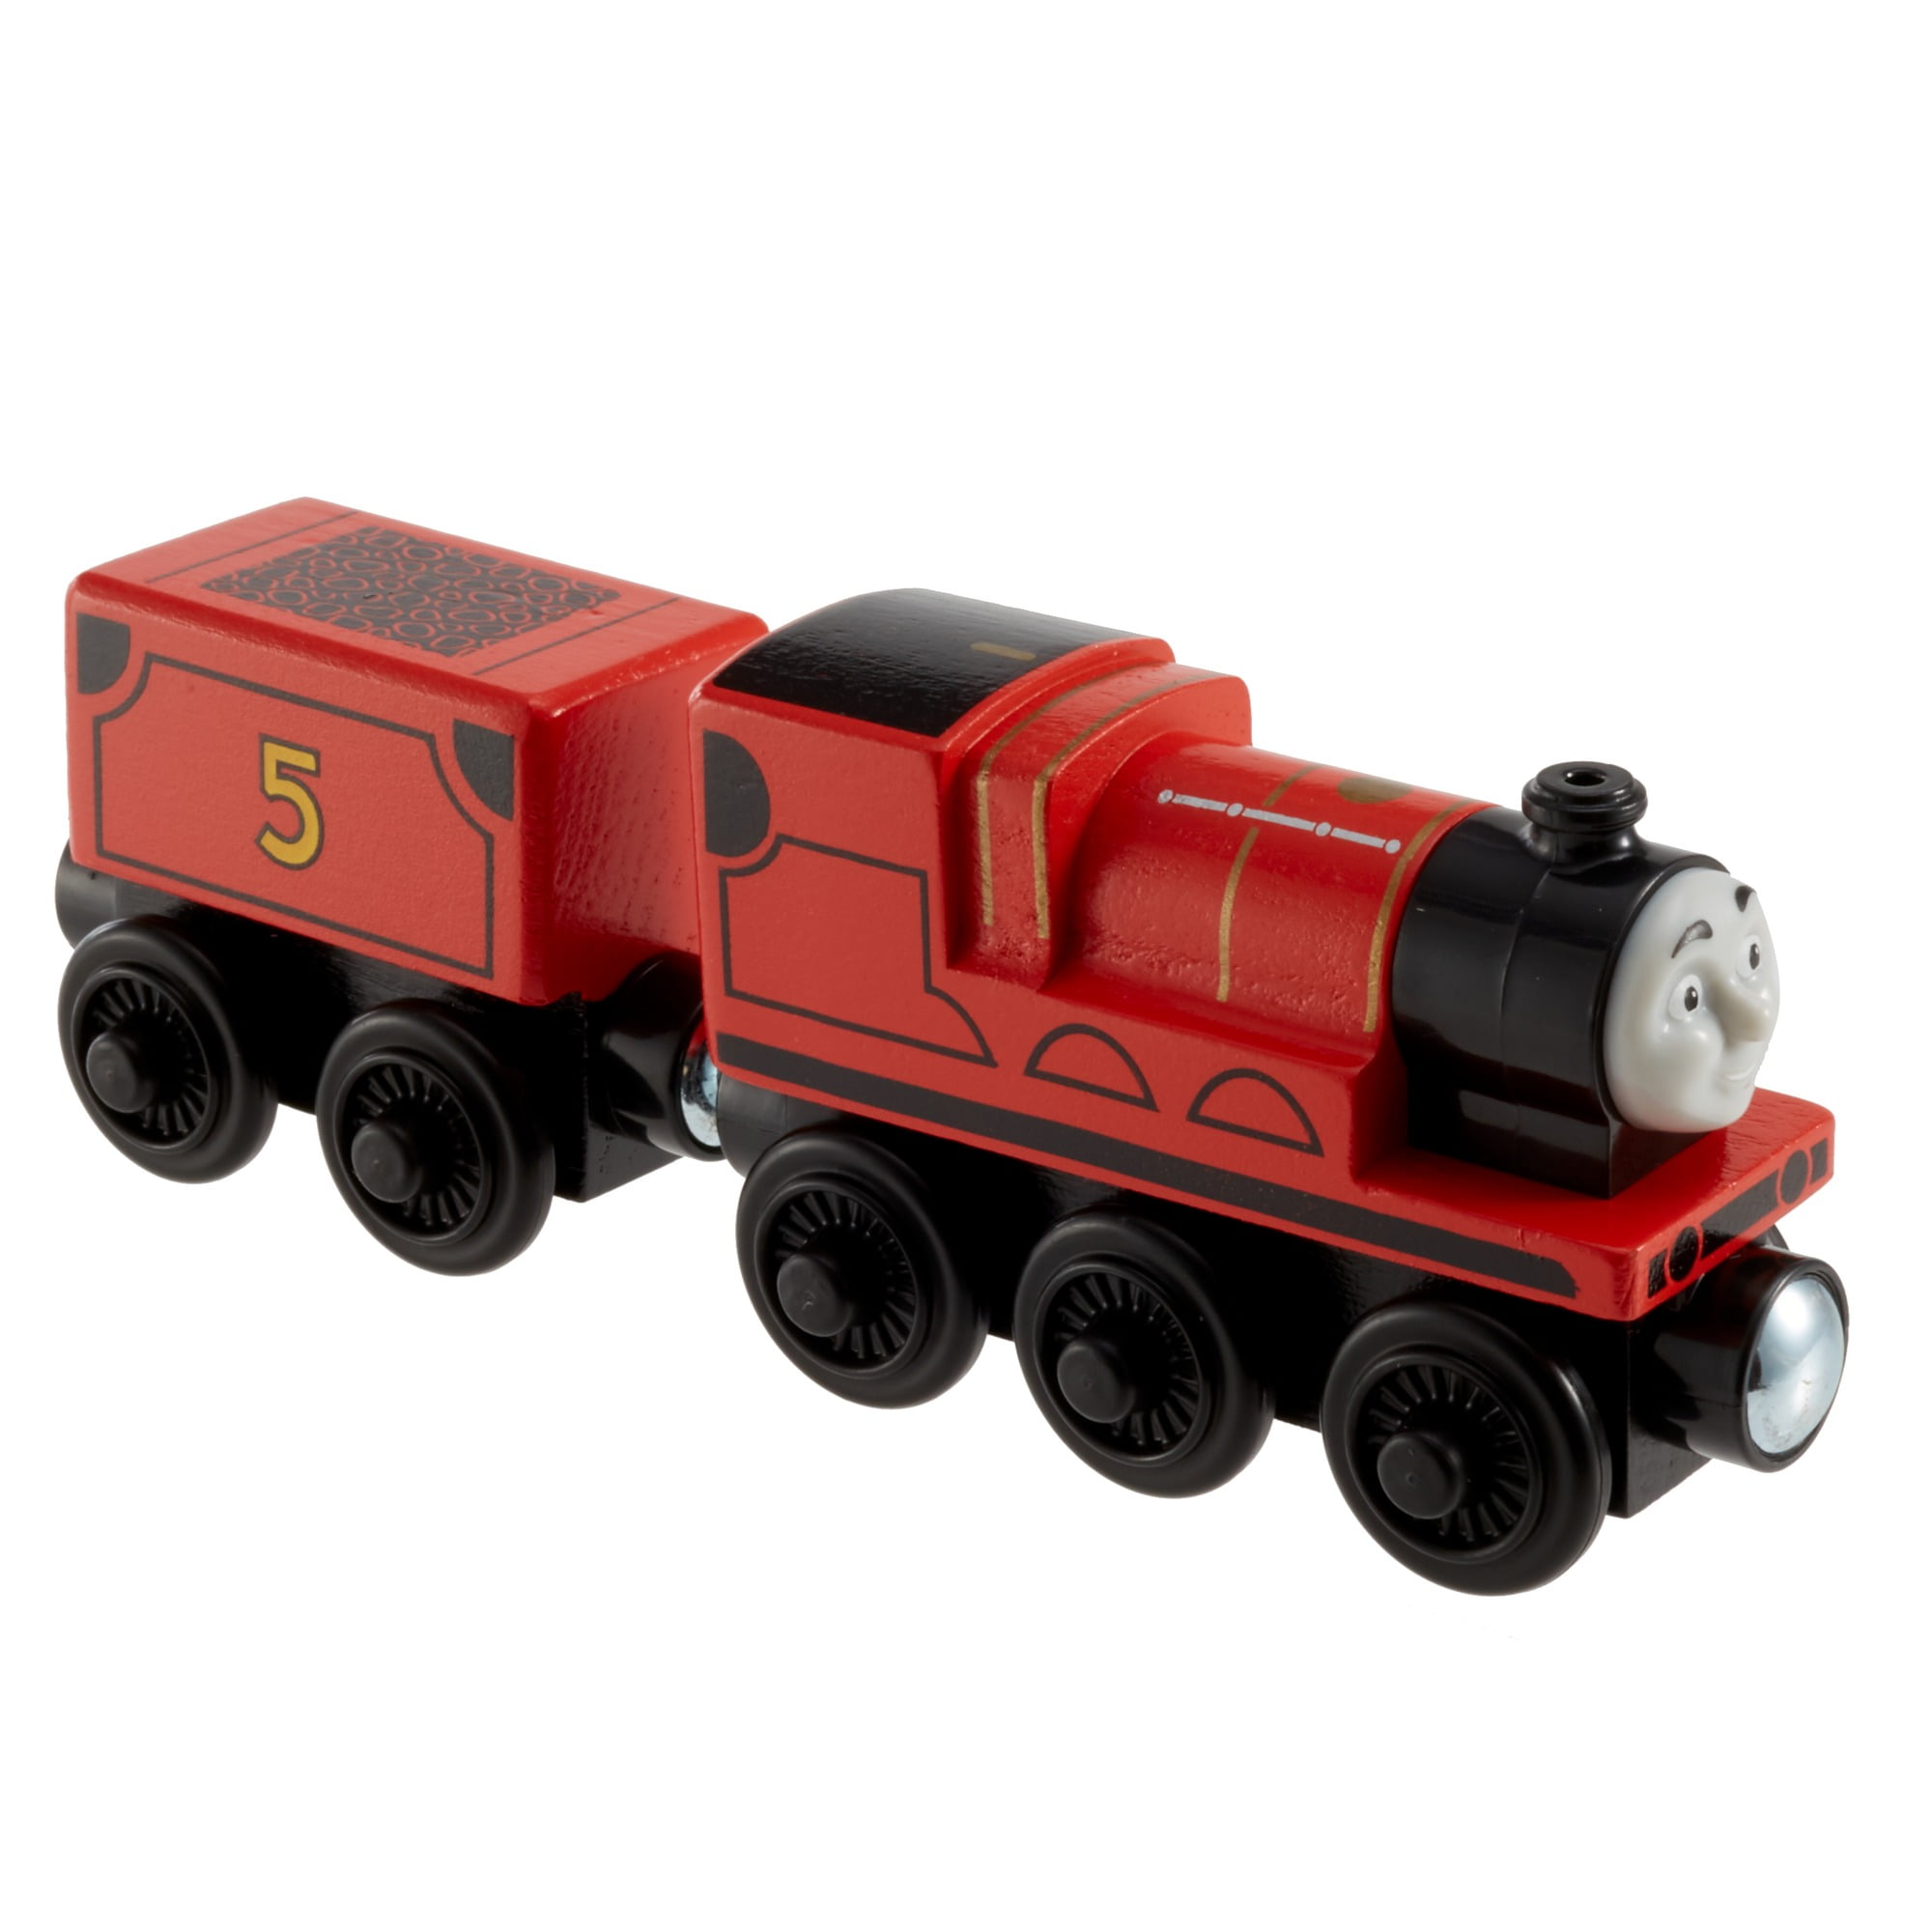 Thomas & Friends Wood Big World Adventures set with train engine figures a vehicle and accessories